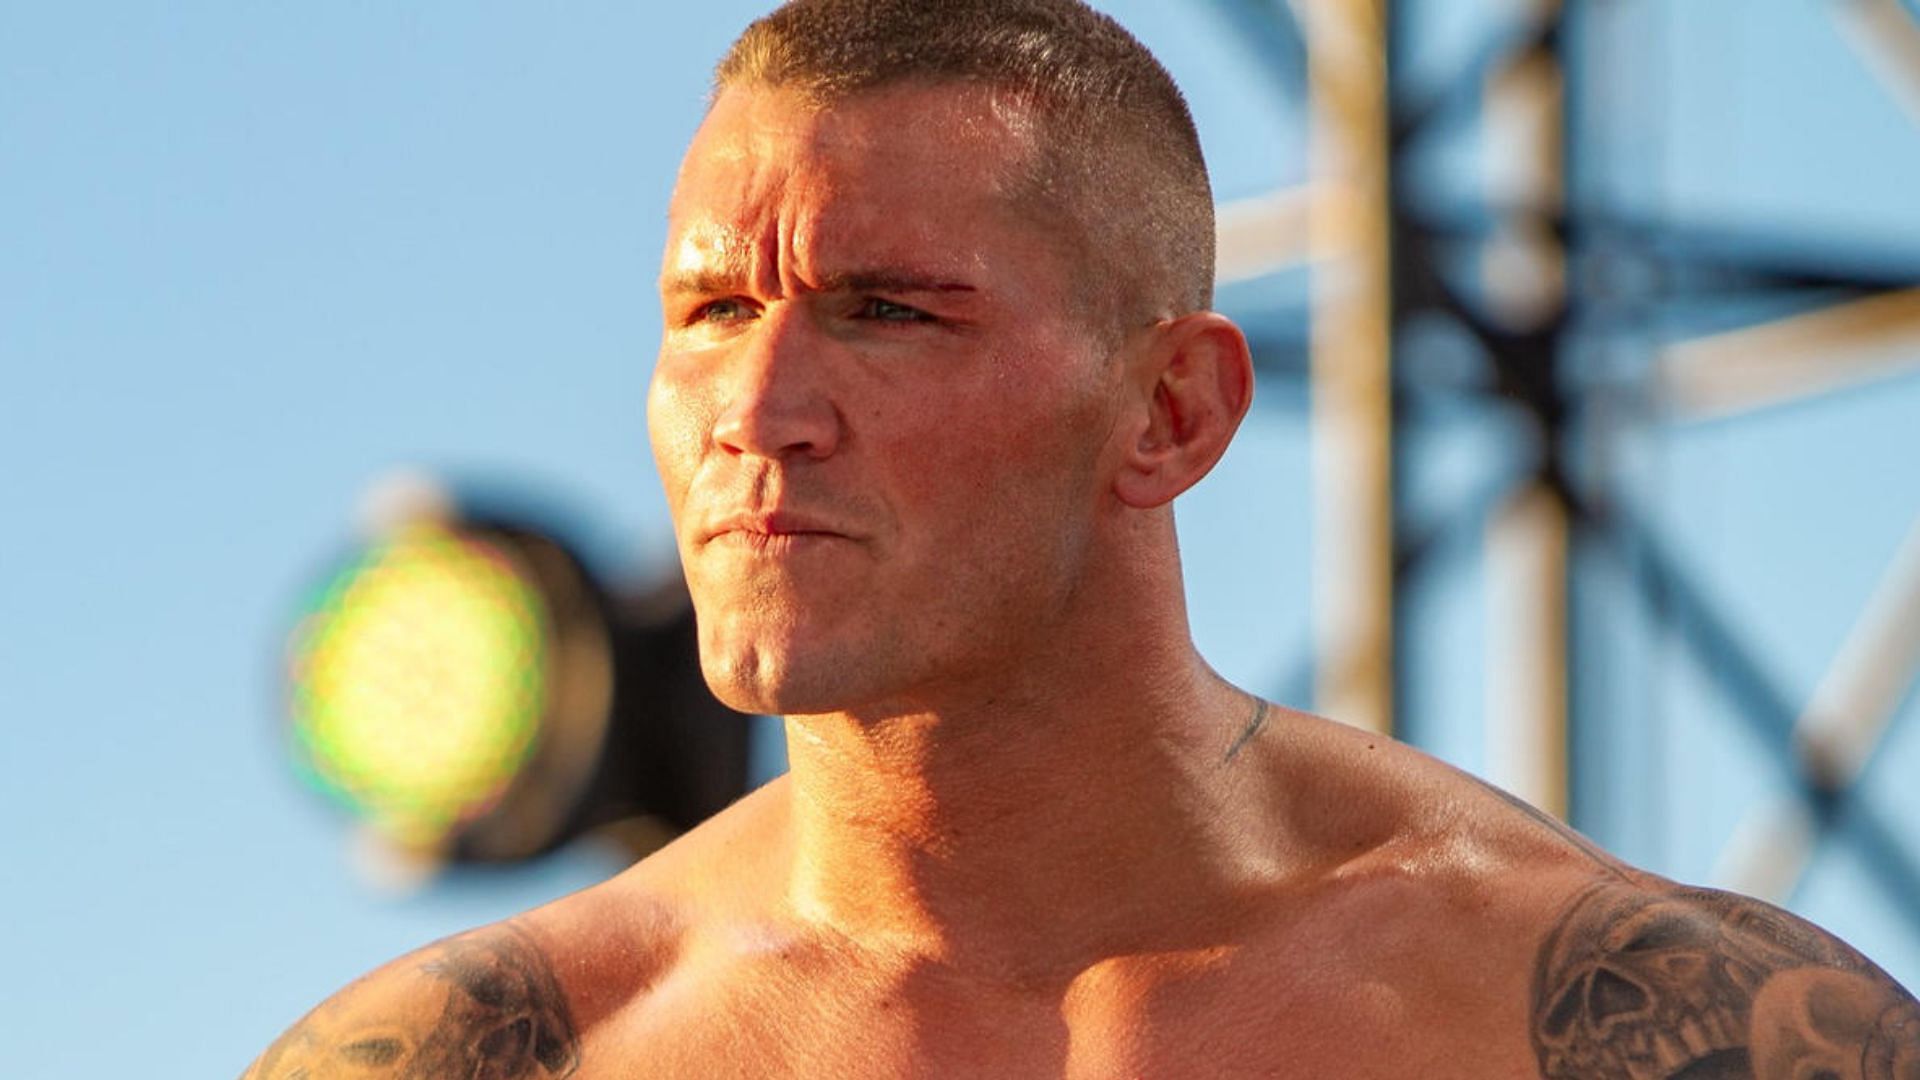 WWE legend Randy Orton has been sidelined due to injury since May 2022.